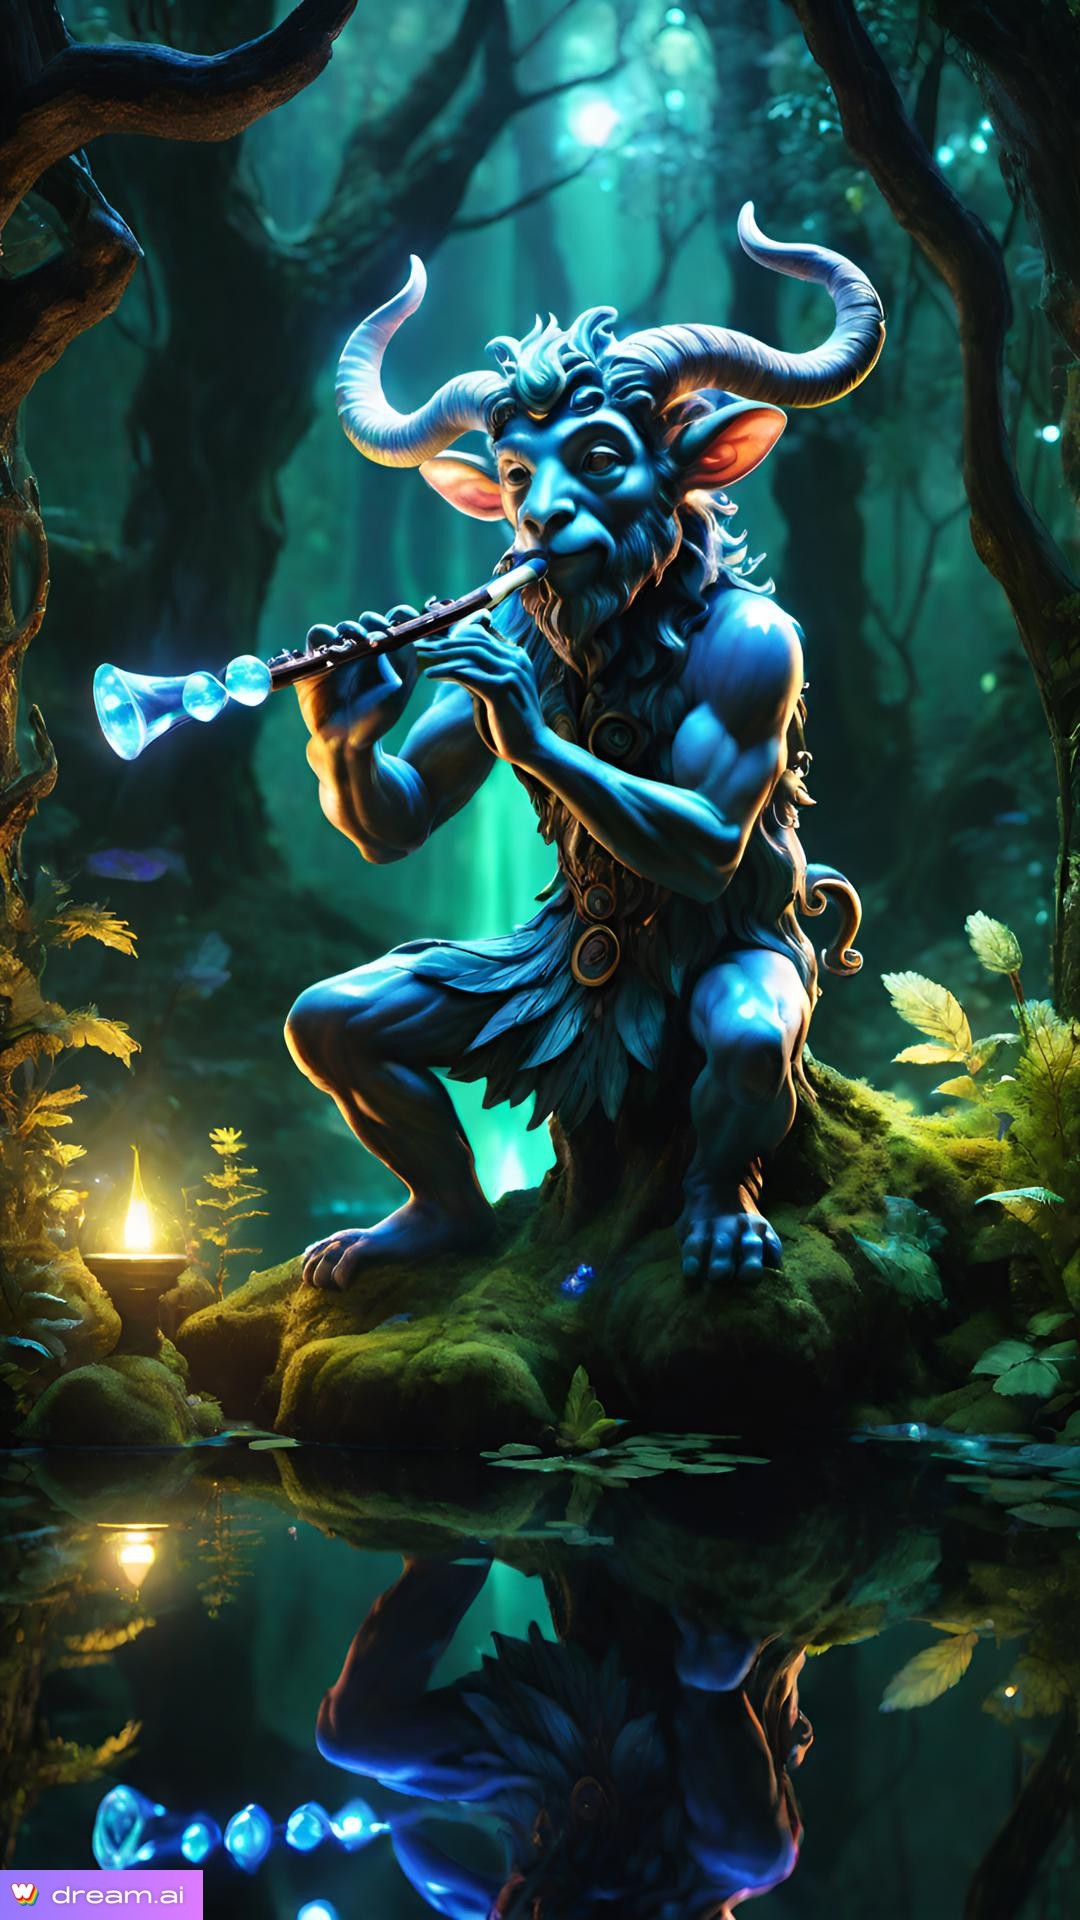 a statue of a horned creature playing a flute